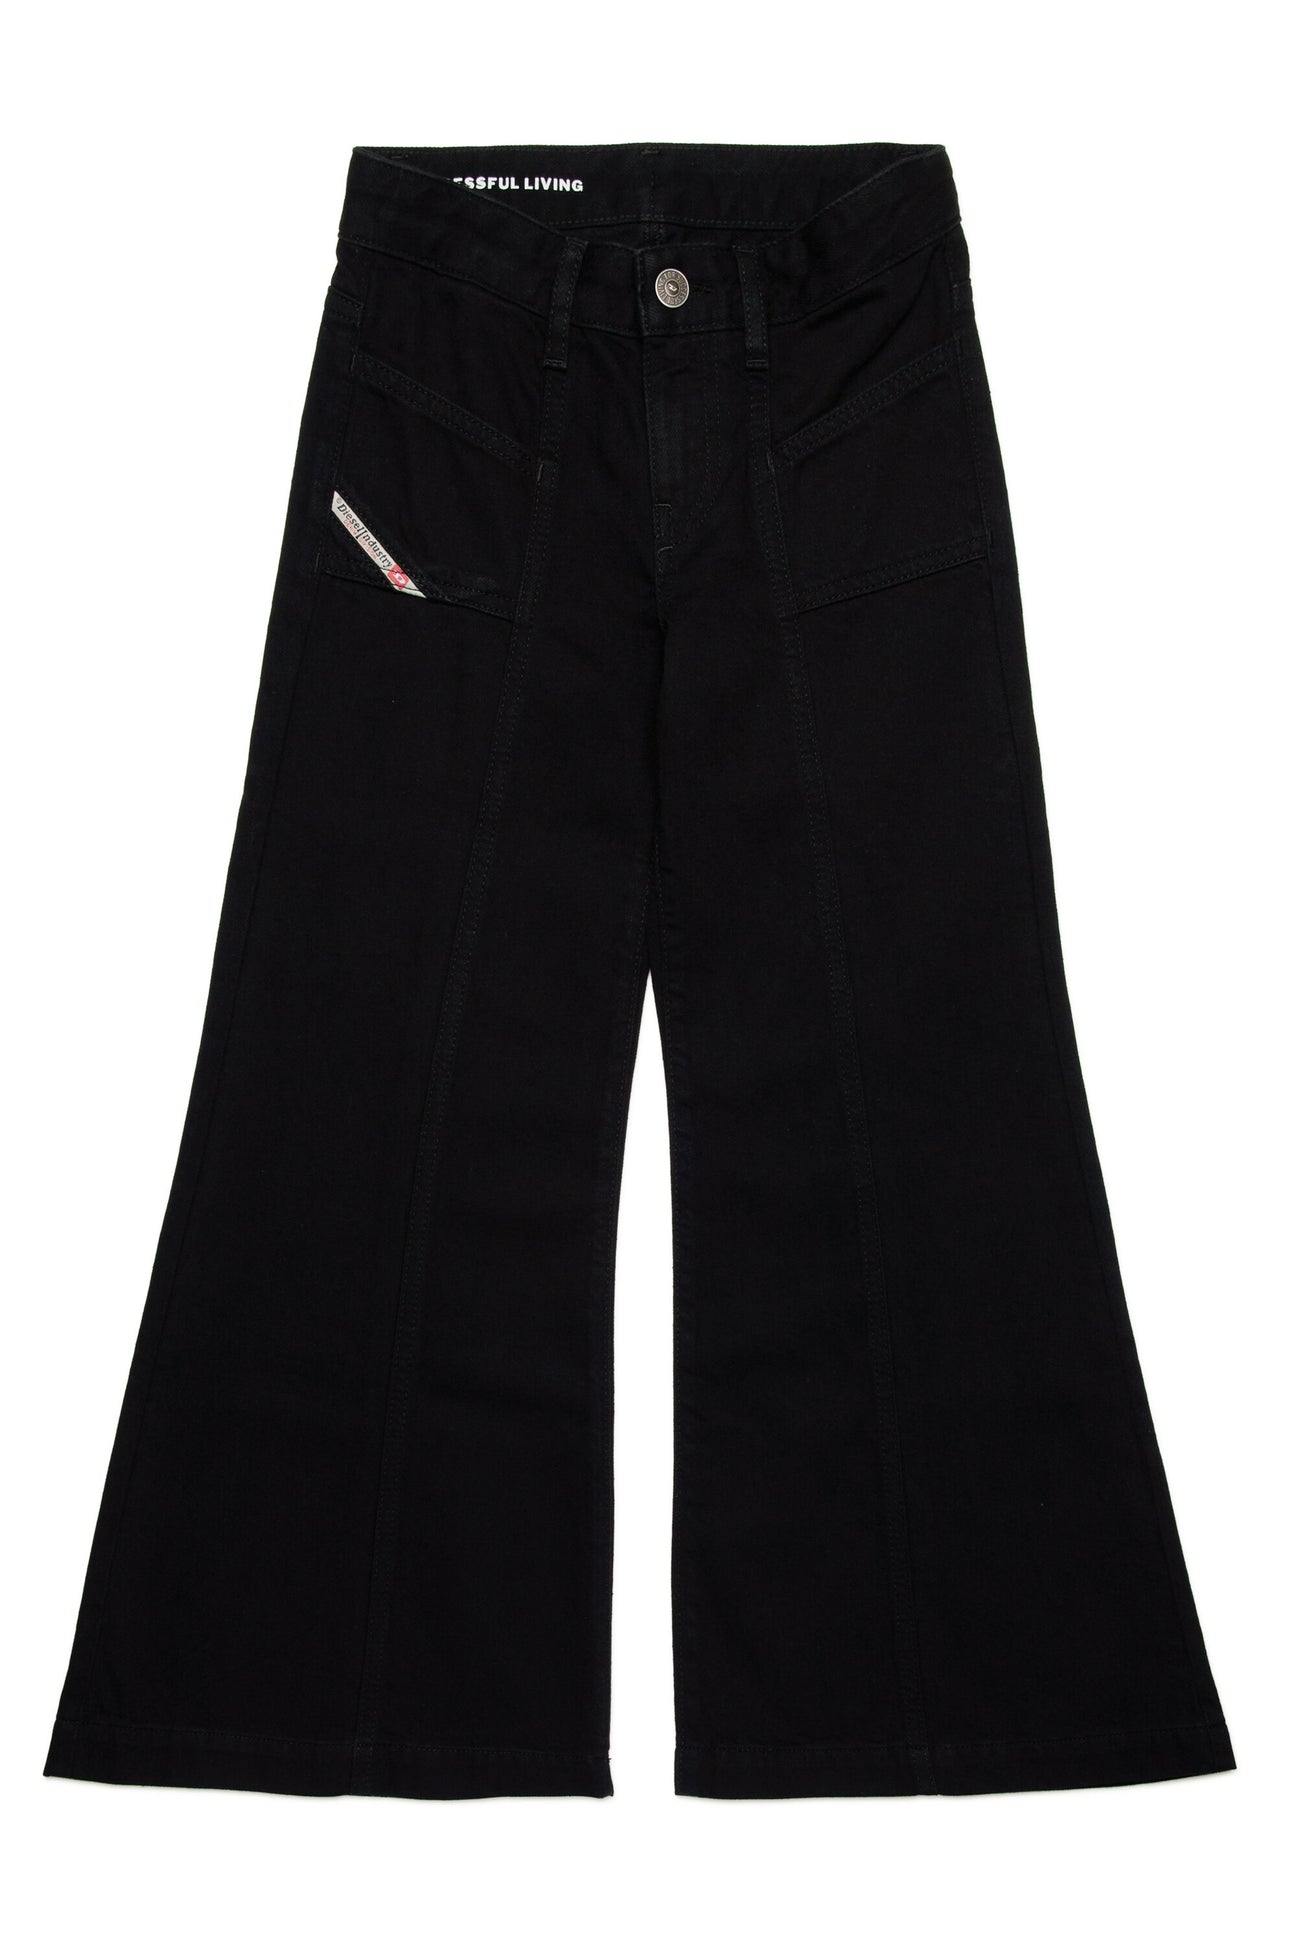 Jeans flare negros - D-Akii 